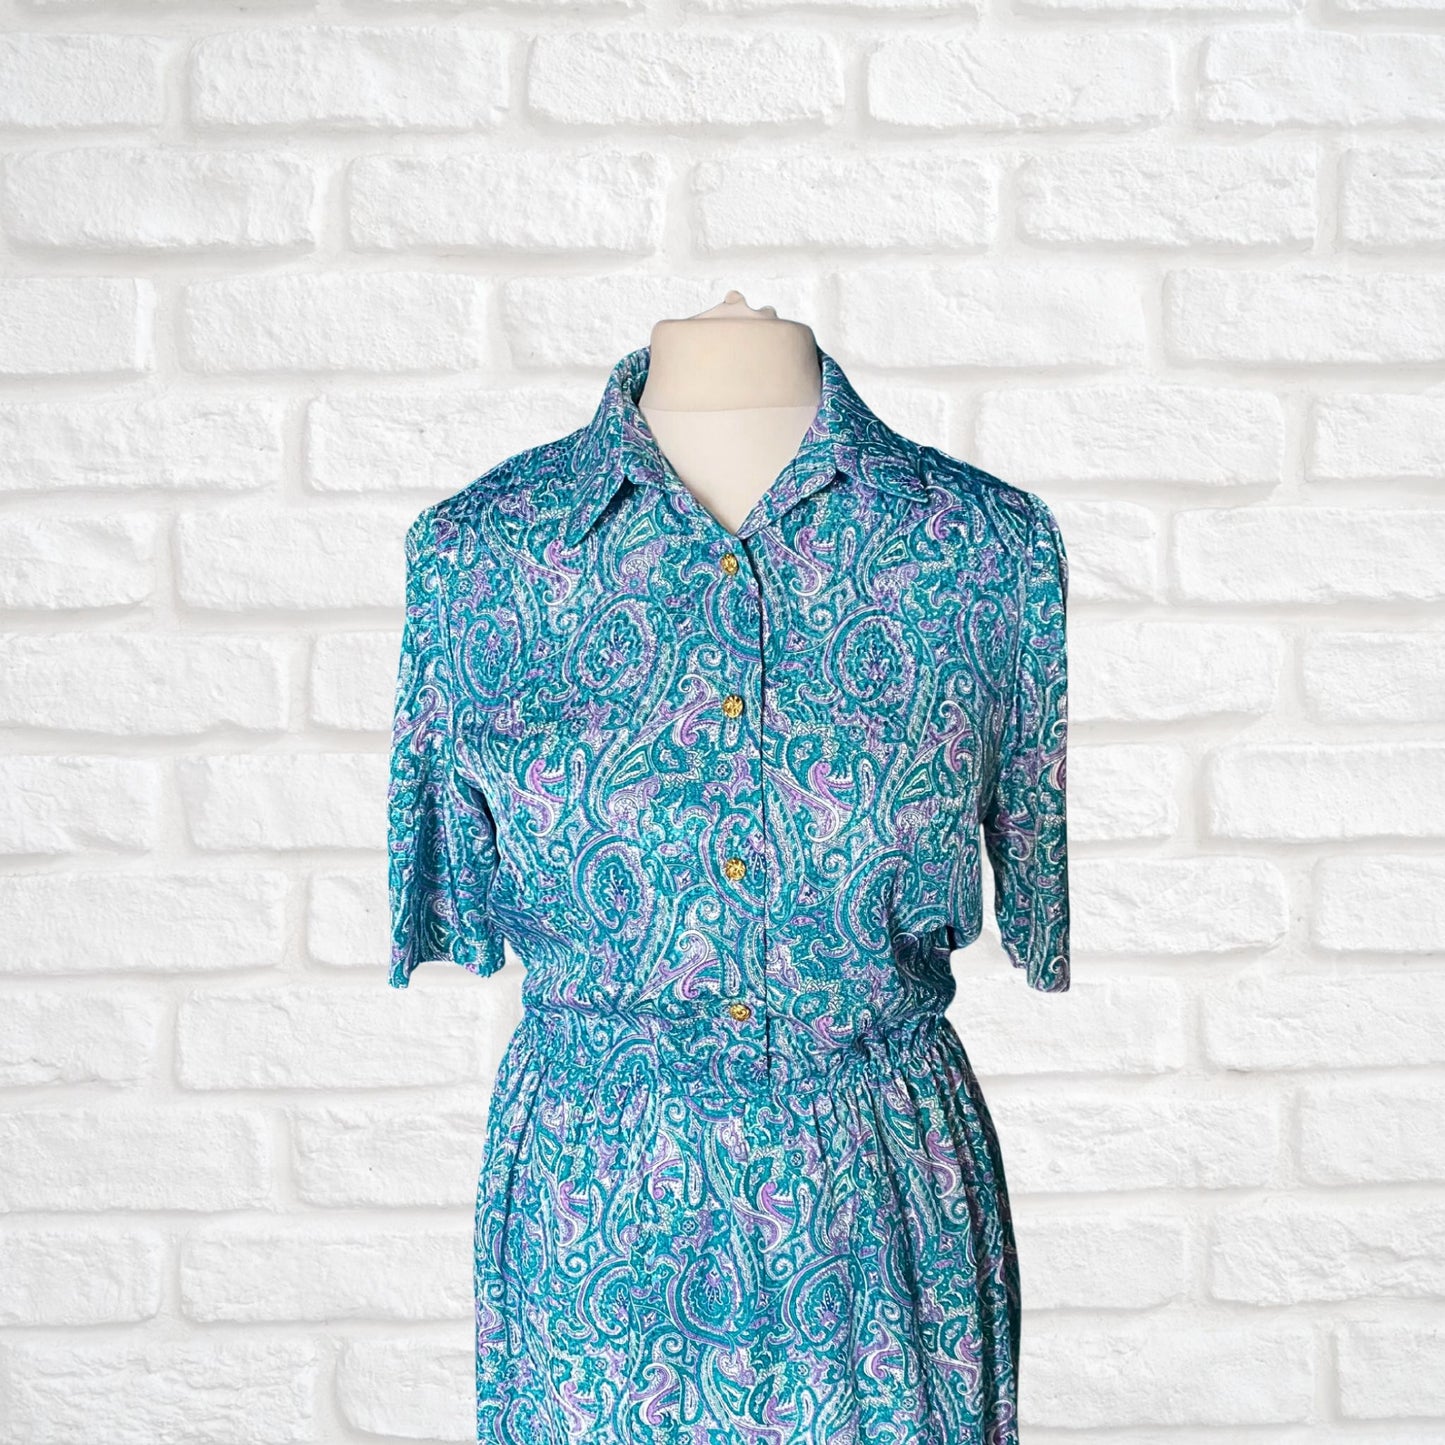 Vintage 80s Purple and Teal Silky Paisley Short-Sleeved Midi Dress.Approx UK size 16-18